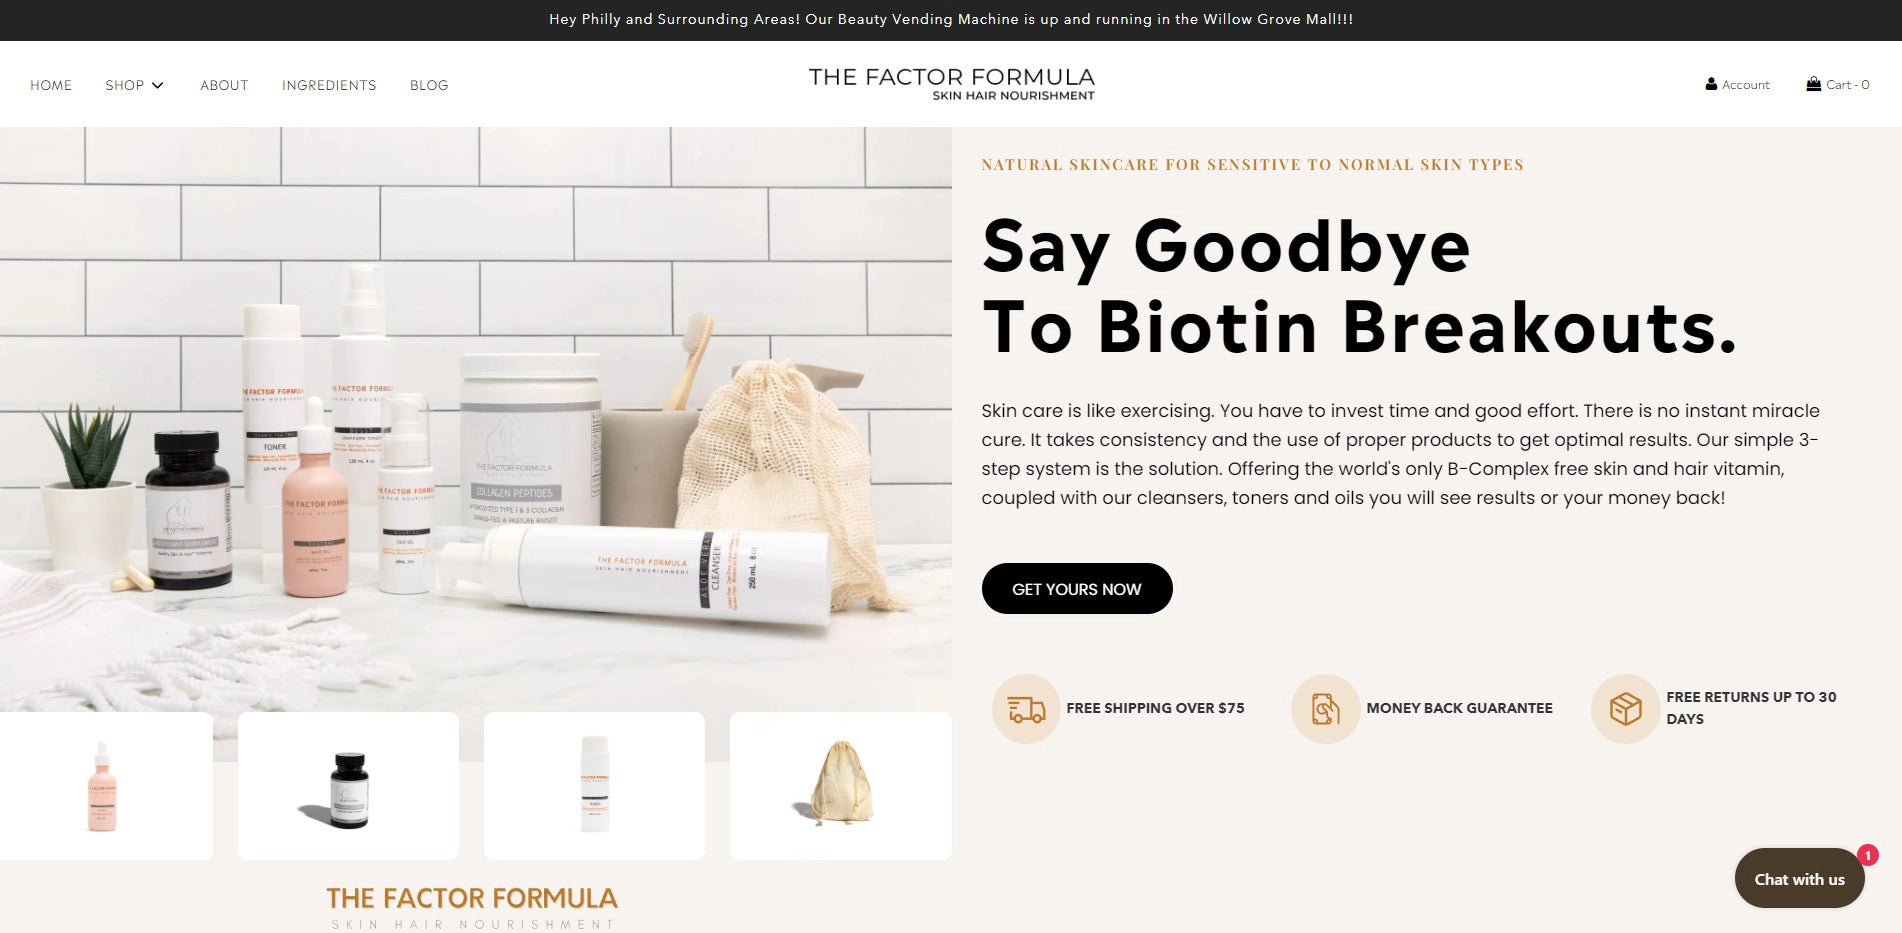 The Factor Formula’s landing page